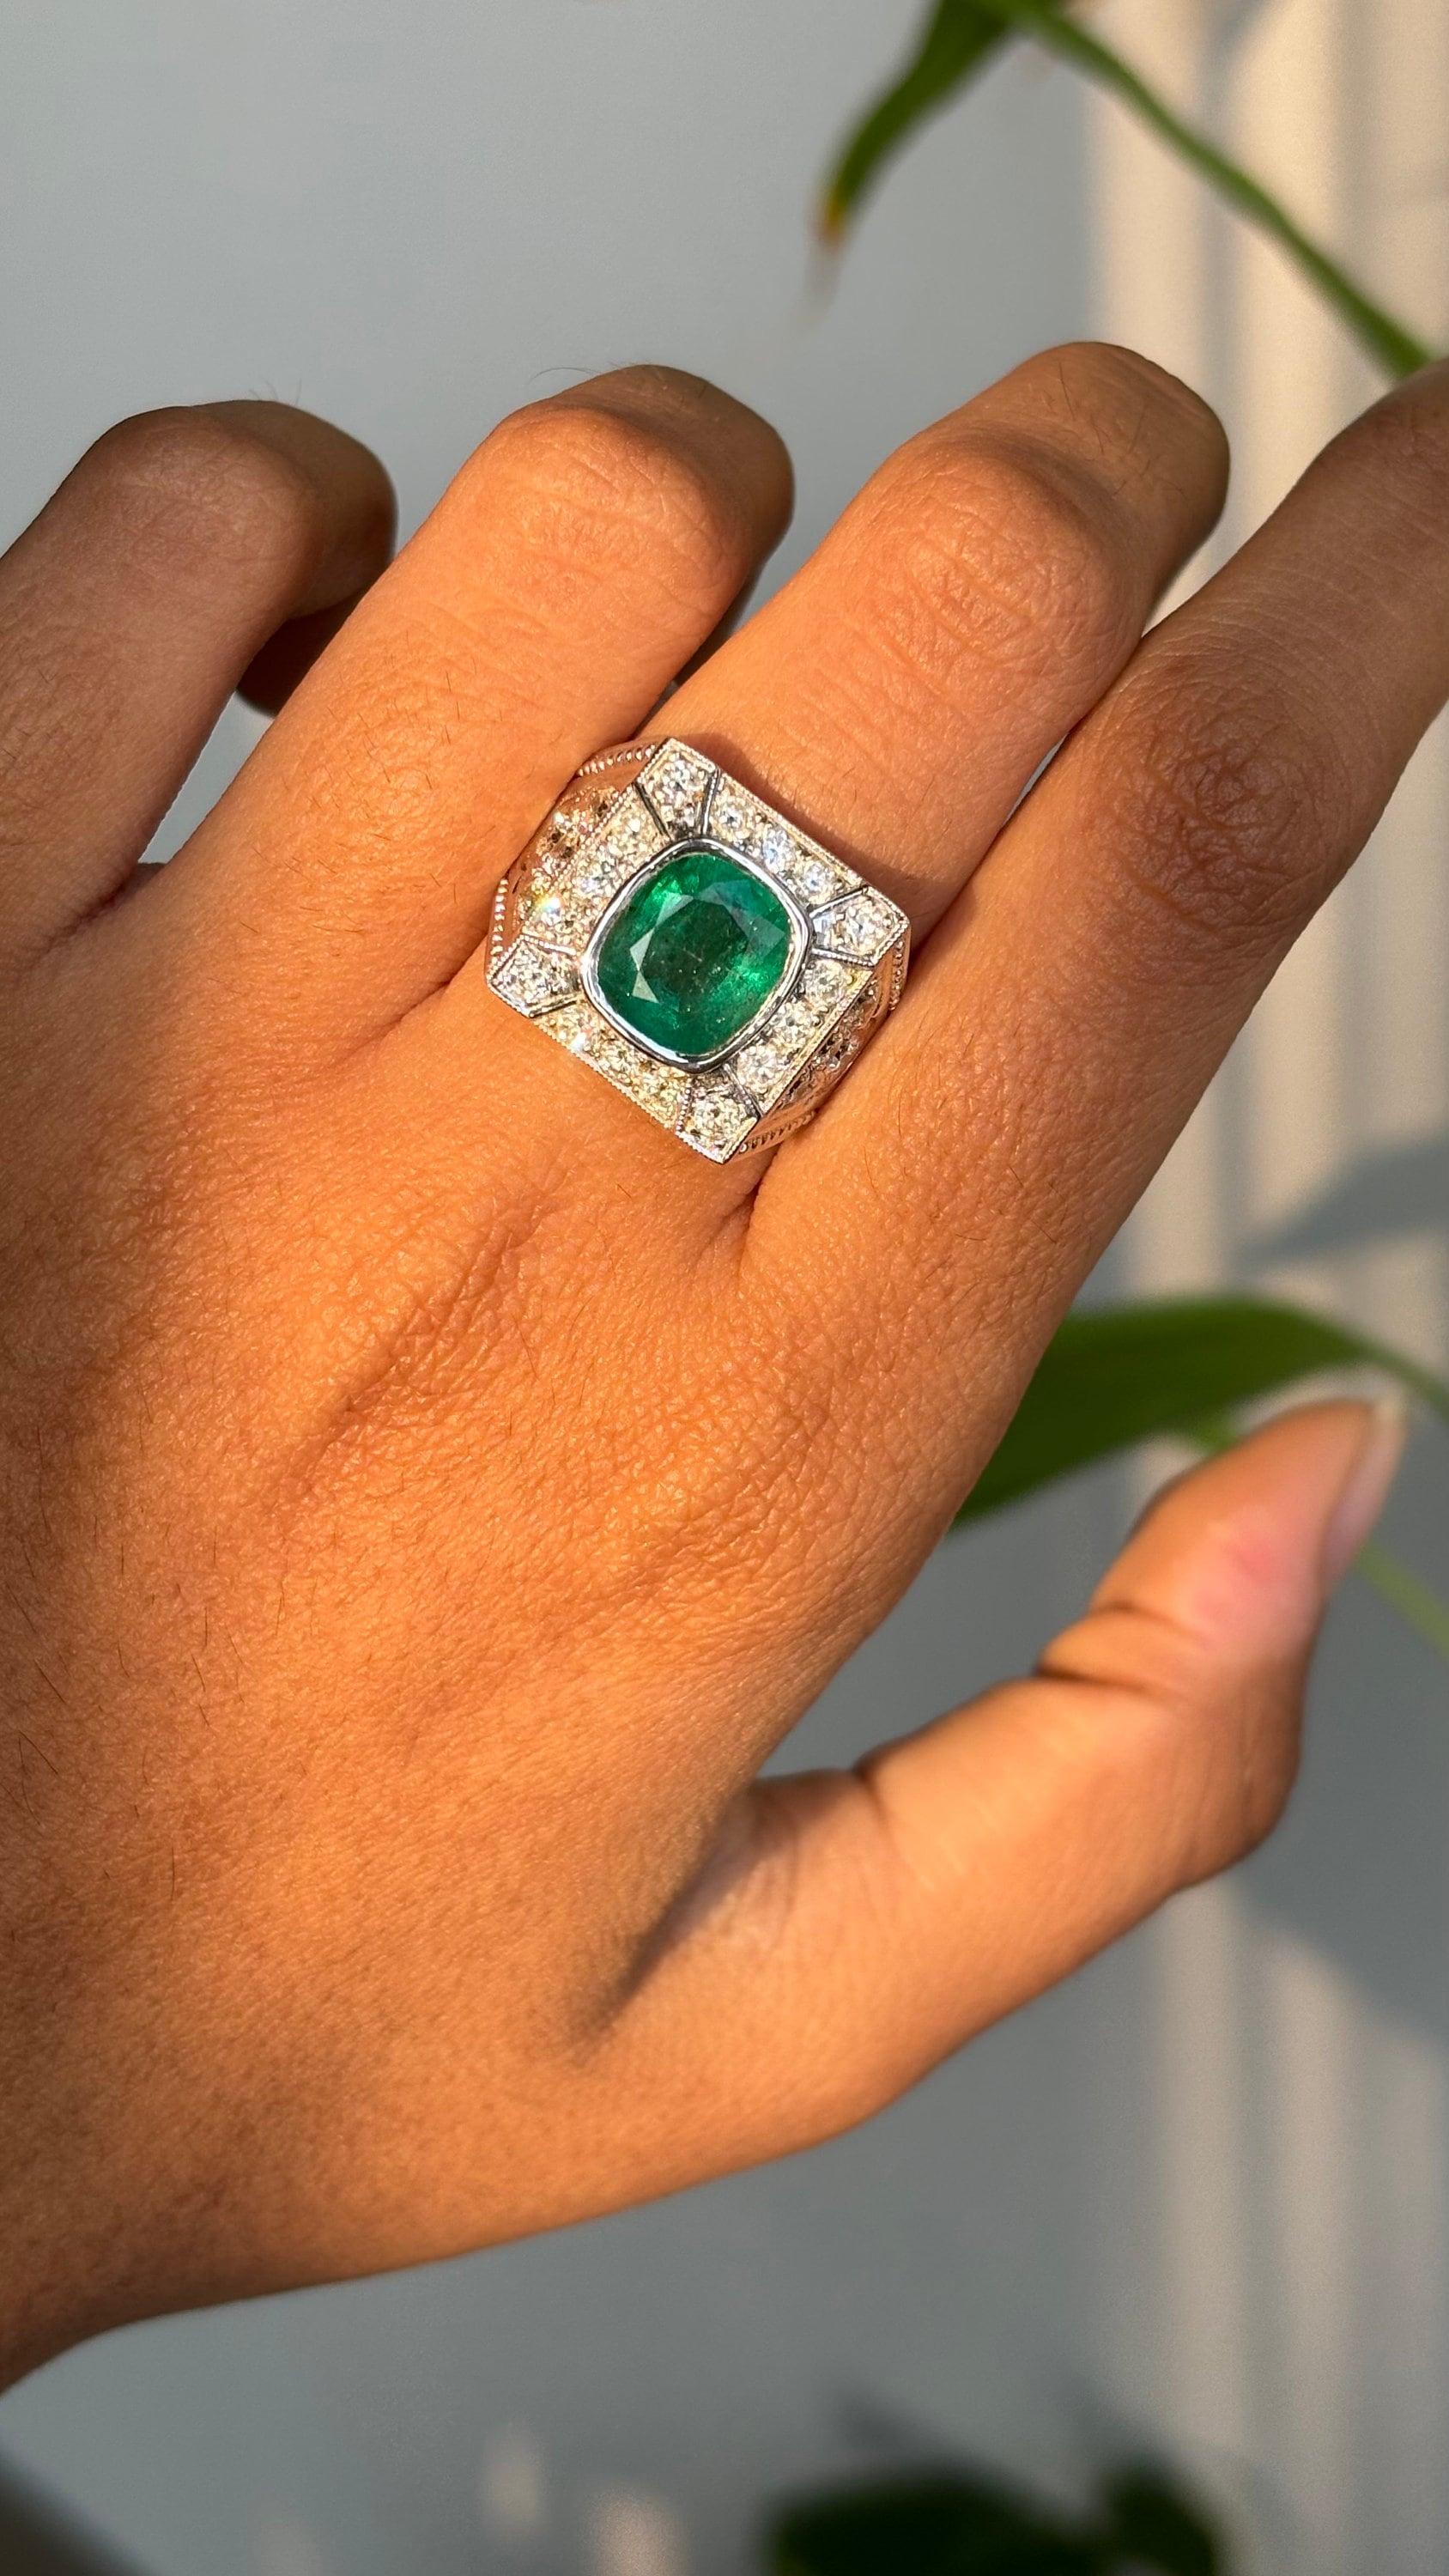 Women's or Men's 2.66 ct Zambian Emerald Art Deco Ring with Old Cut Diamonds in 18K Gold